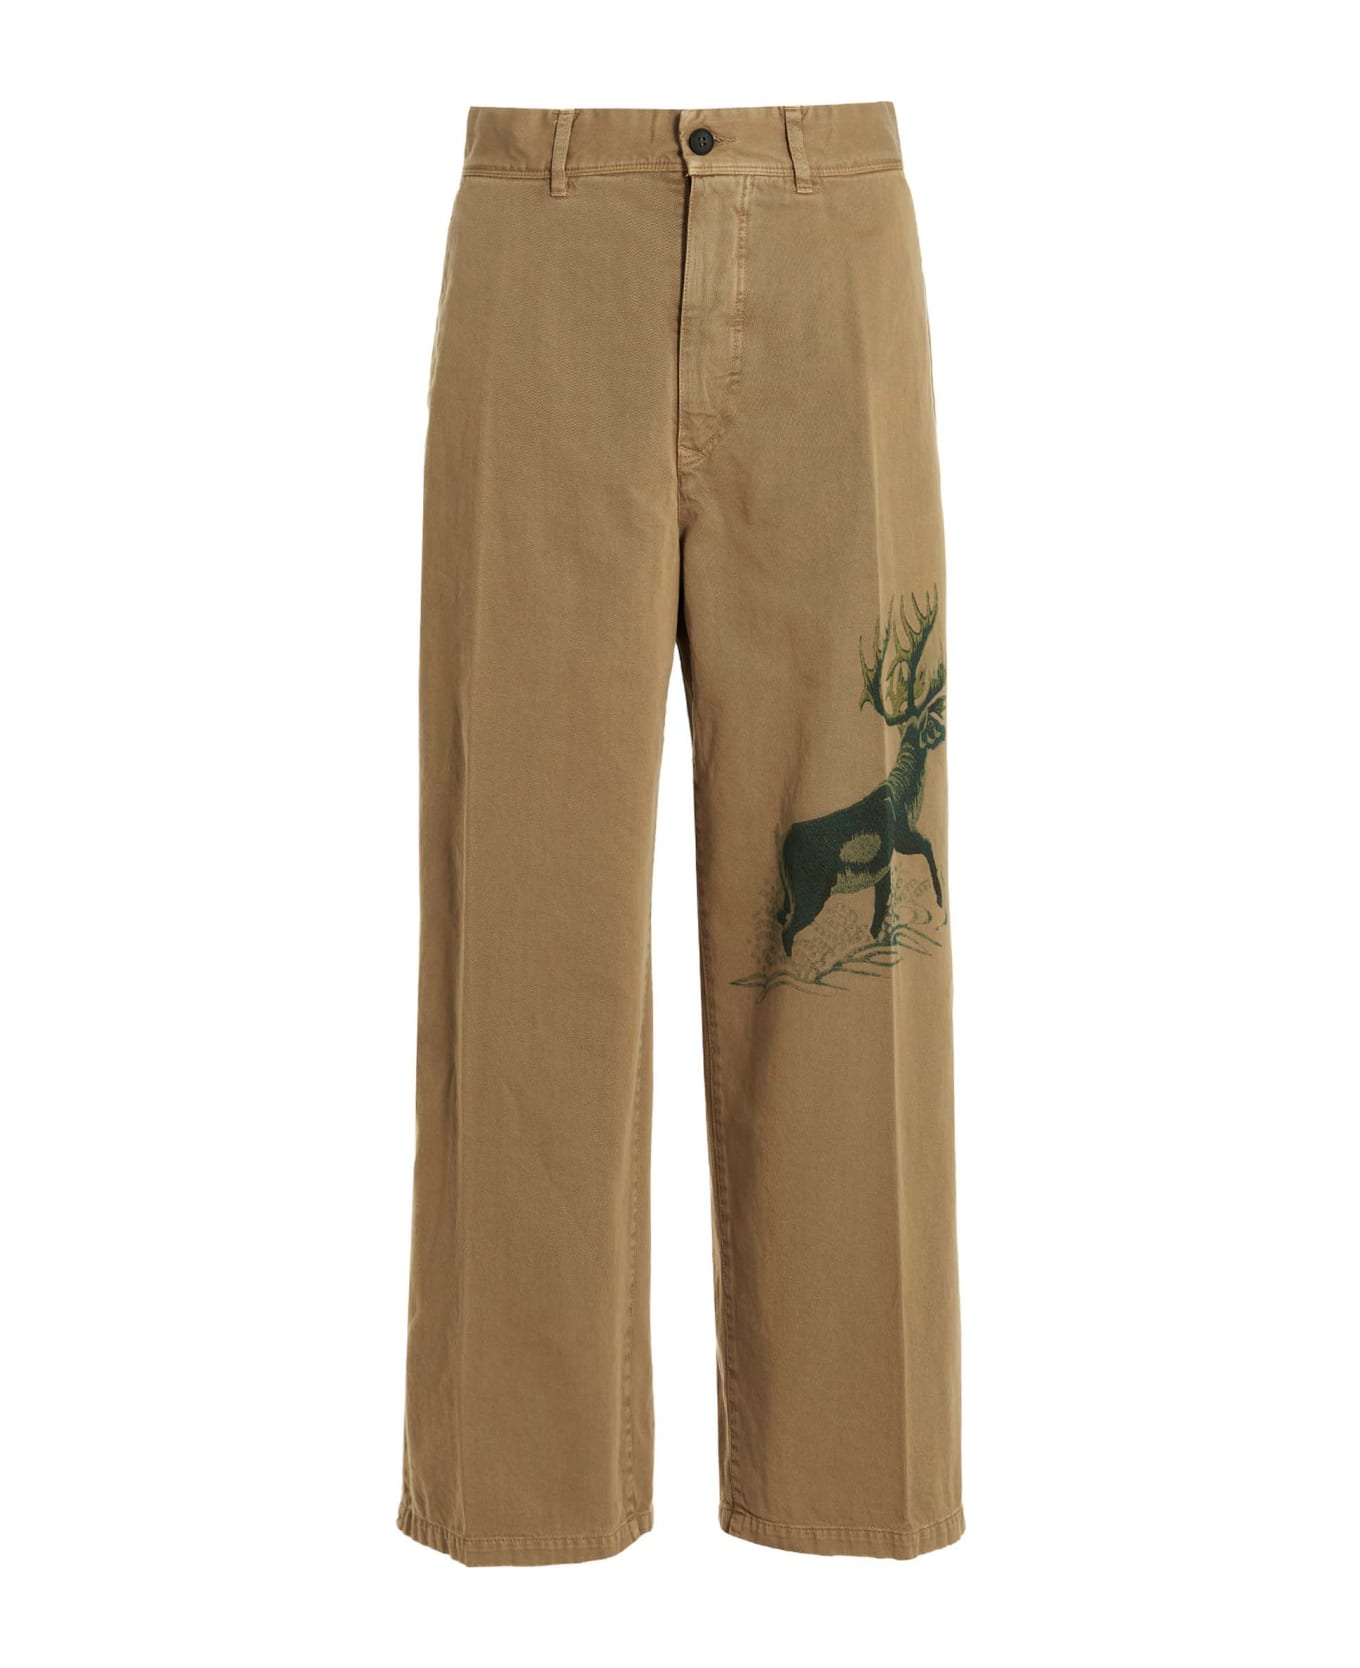 Incotex Red Printed Cotton Trousers - Beige ボトムス